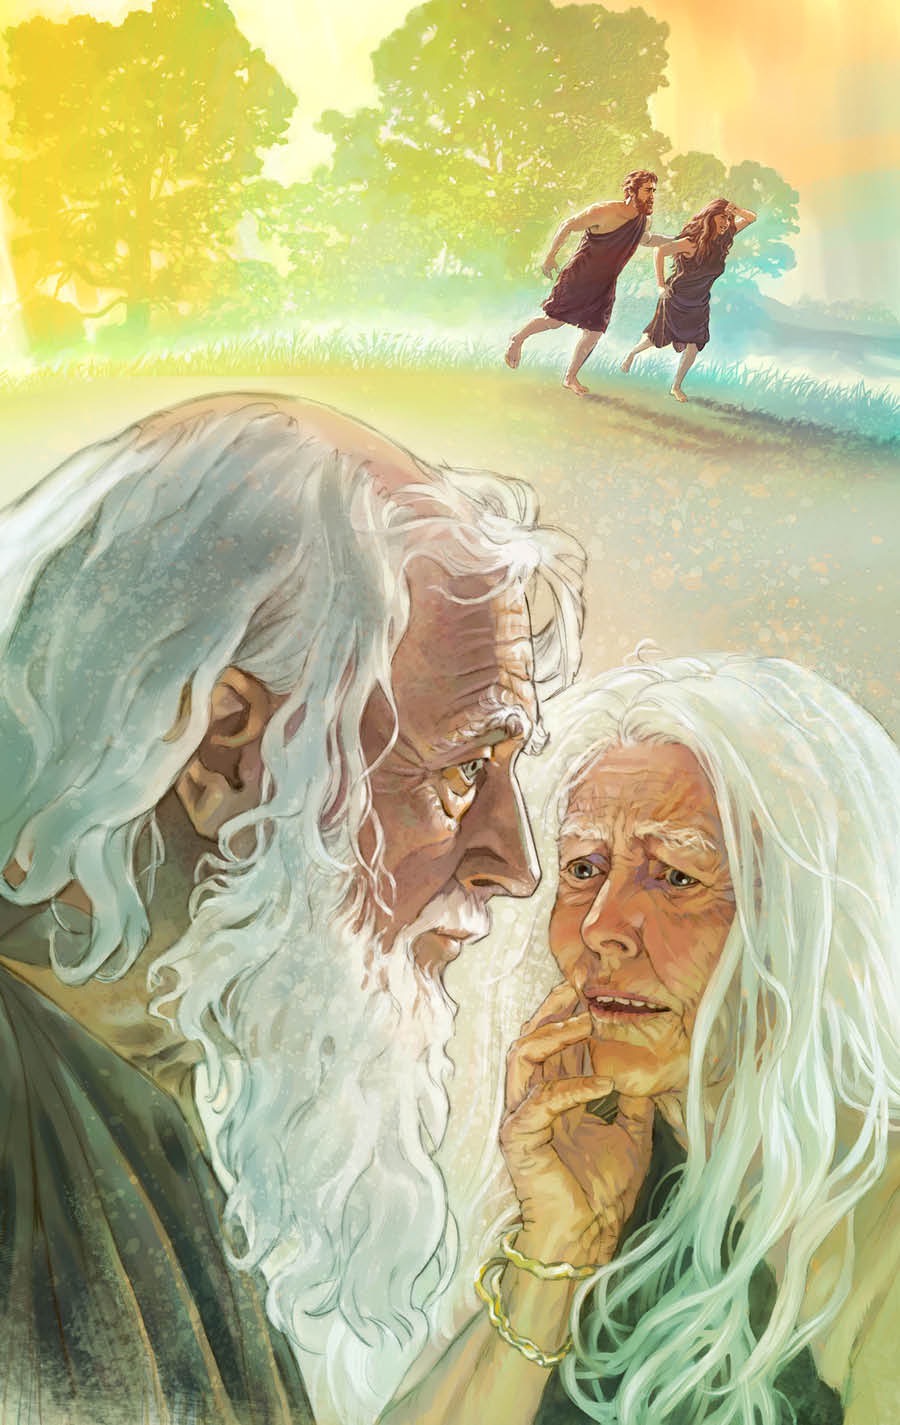 Adam and Eve in their old age